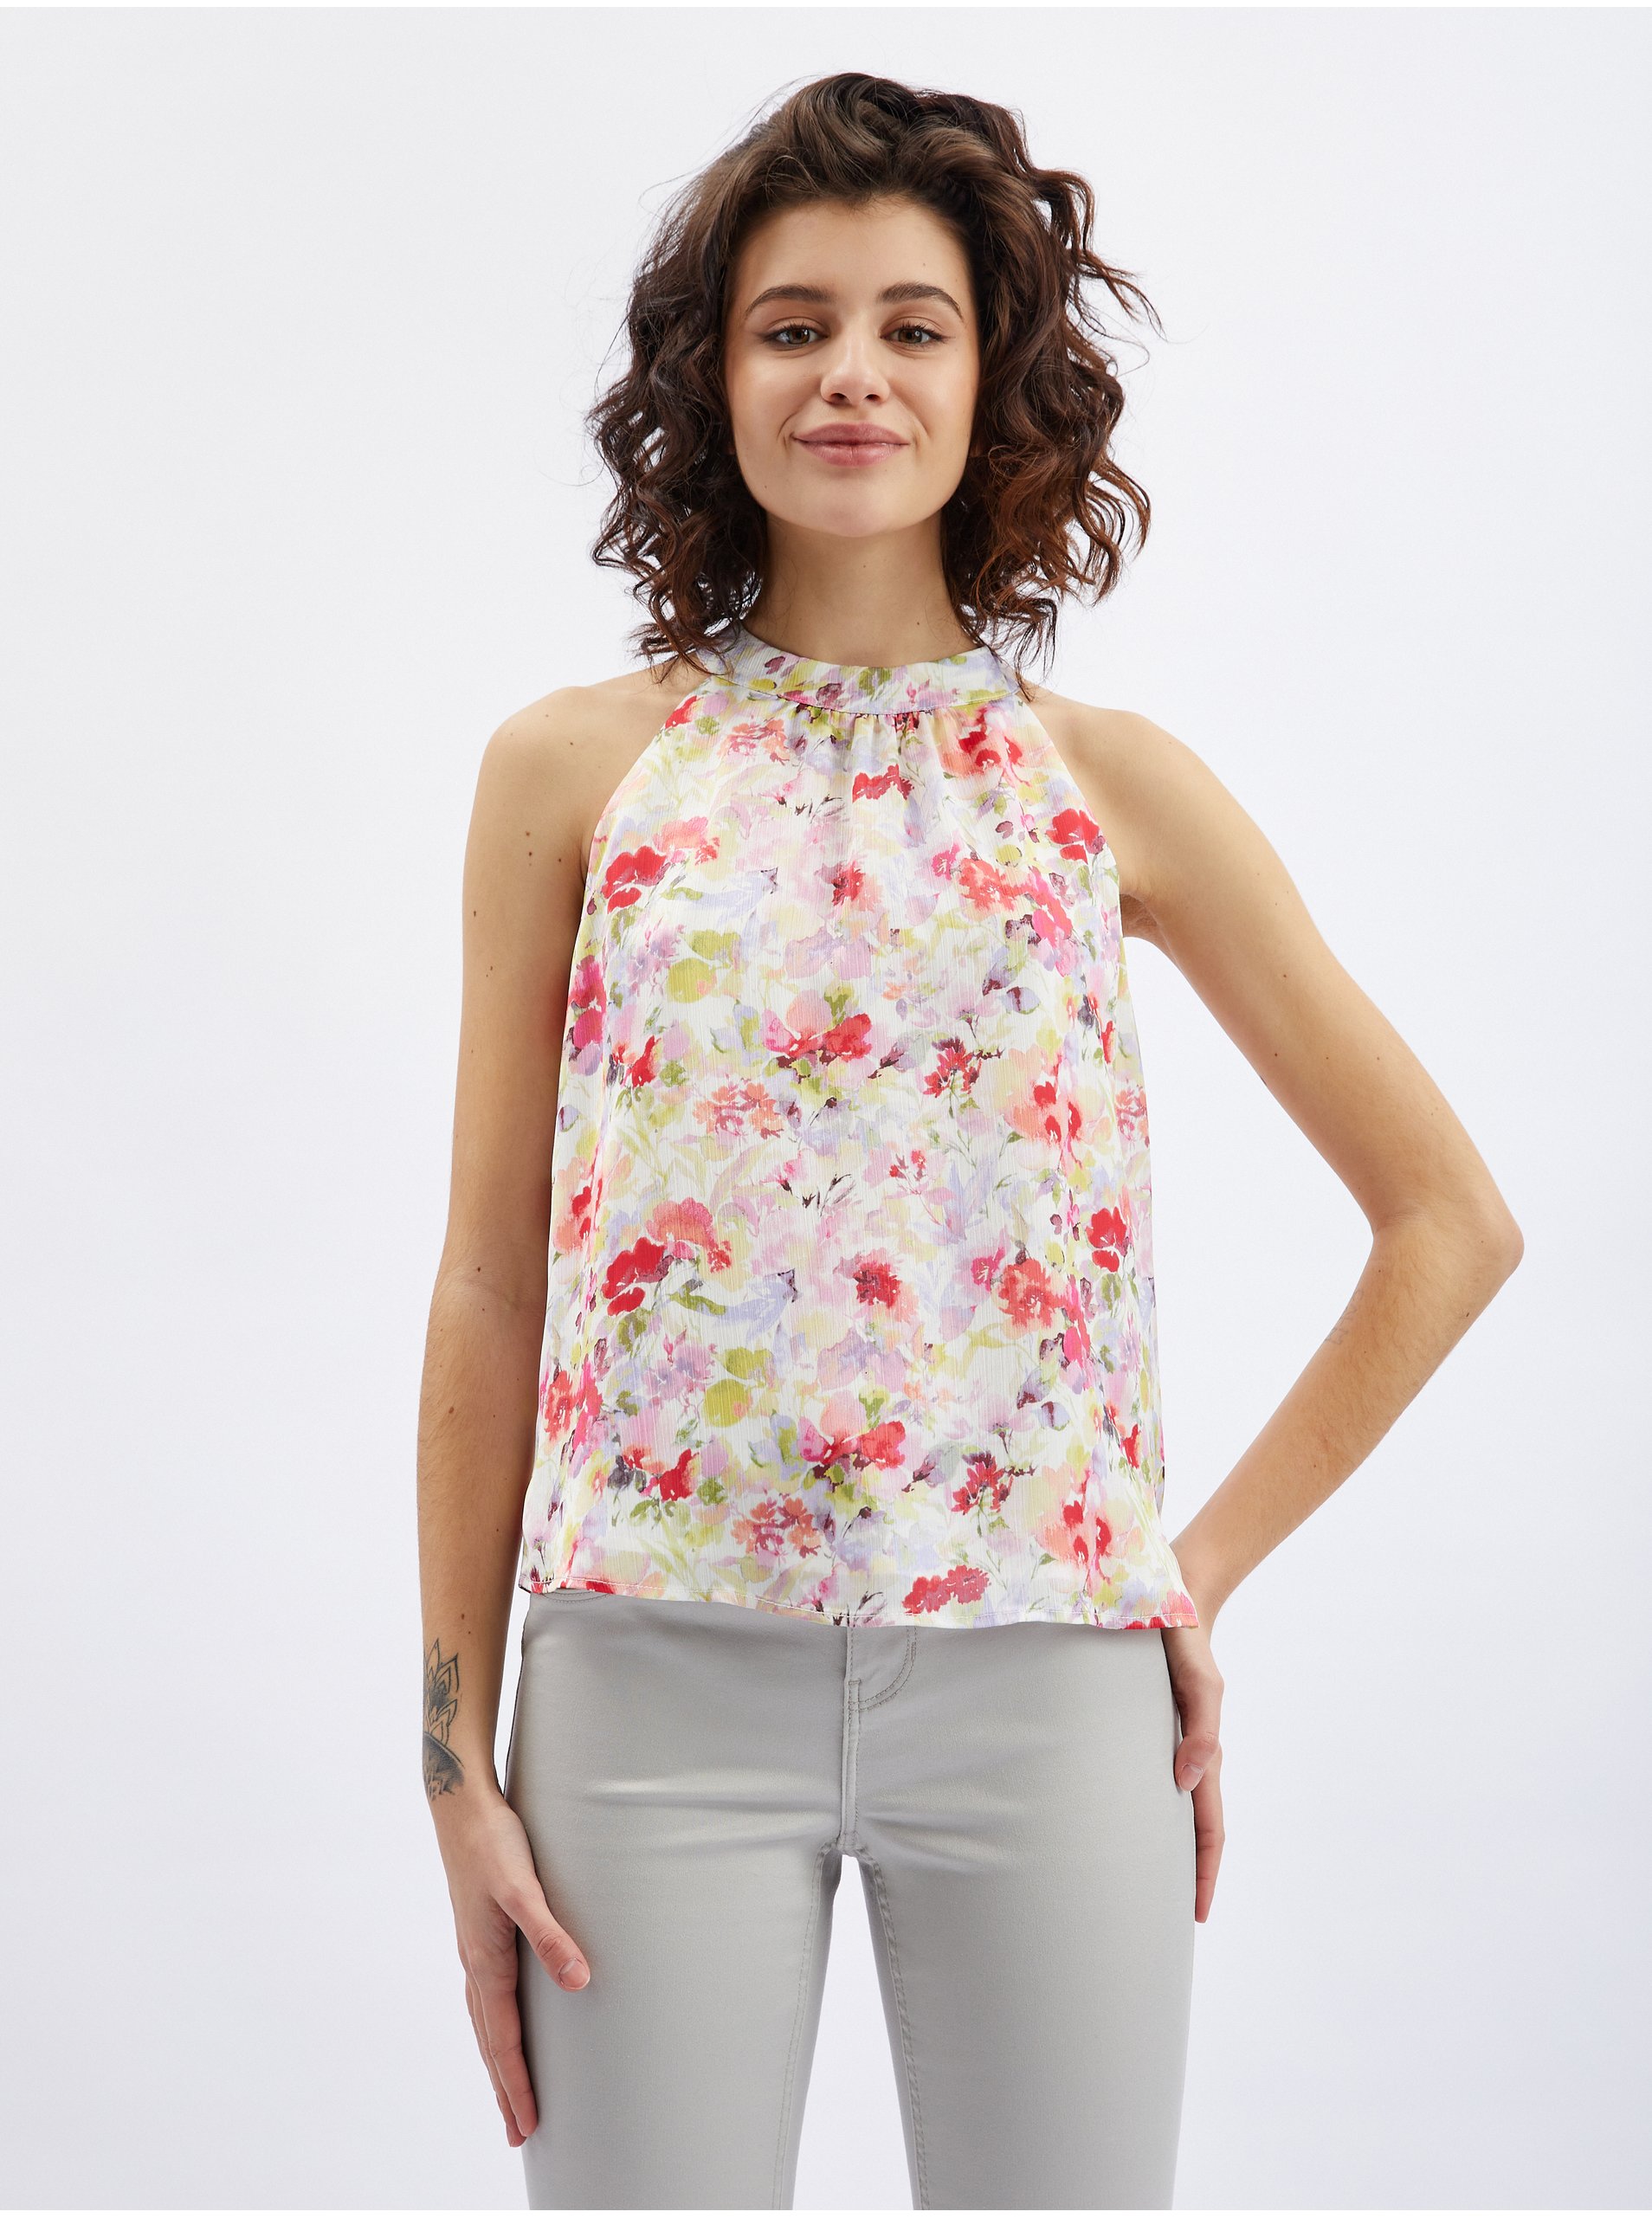 Orsay Pink-cream Women's Floral Blouse - Women